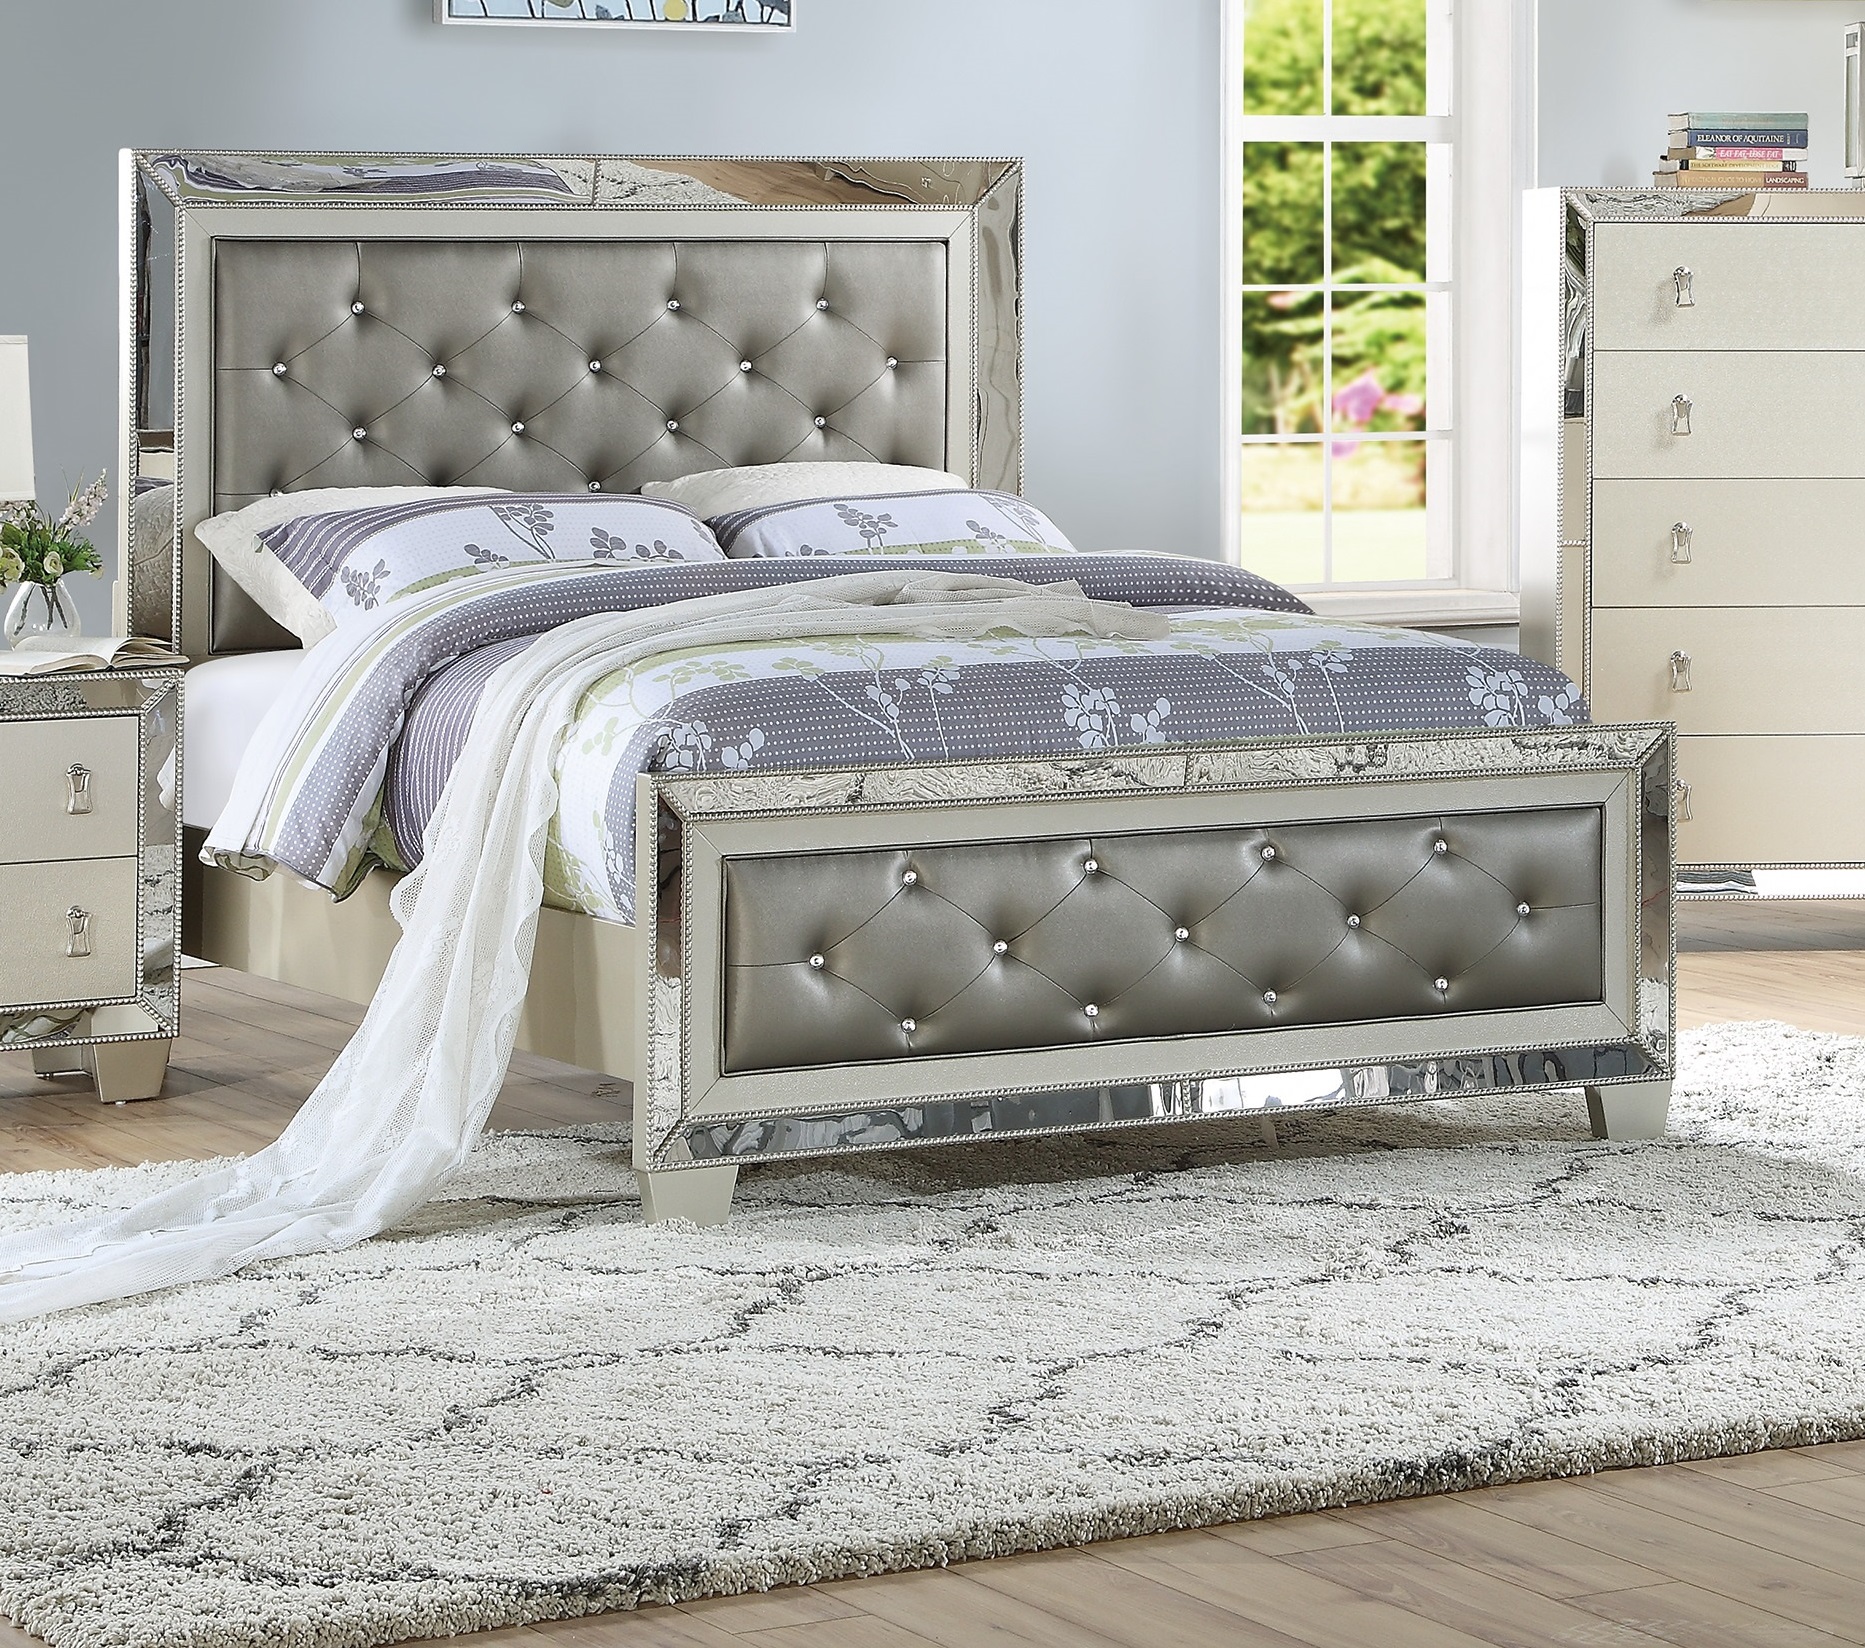 Esofa Eastern King Size Bed Silver, King Size Bed Frame And Headboard